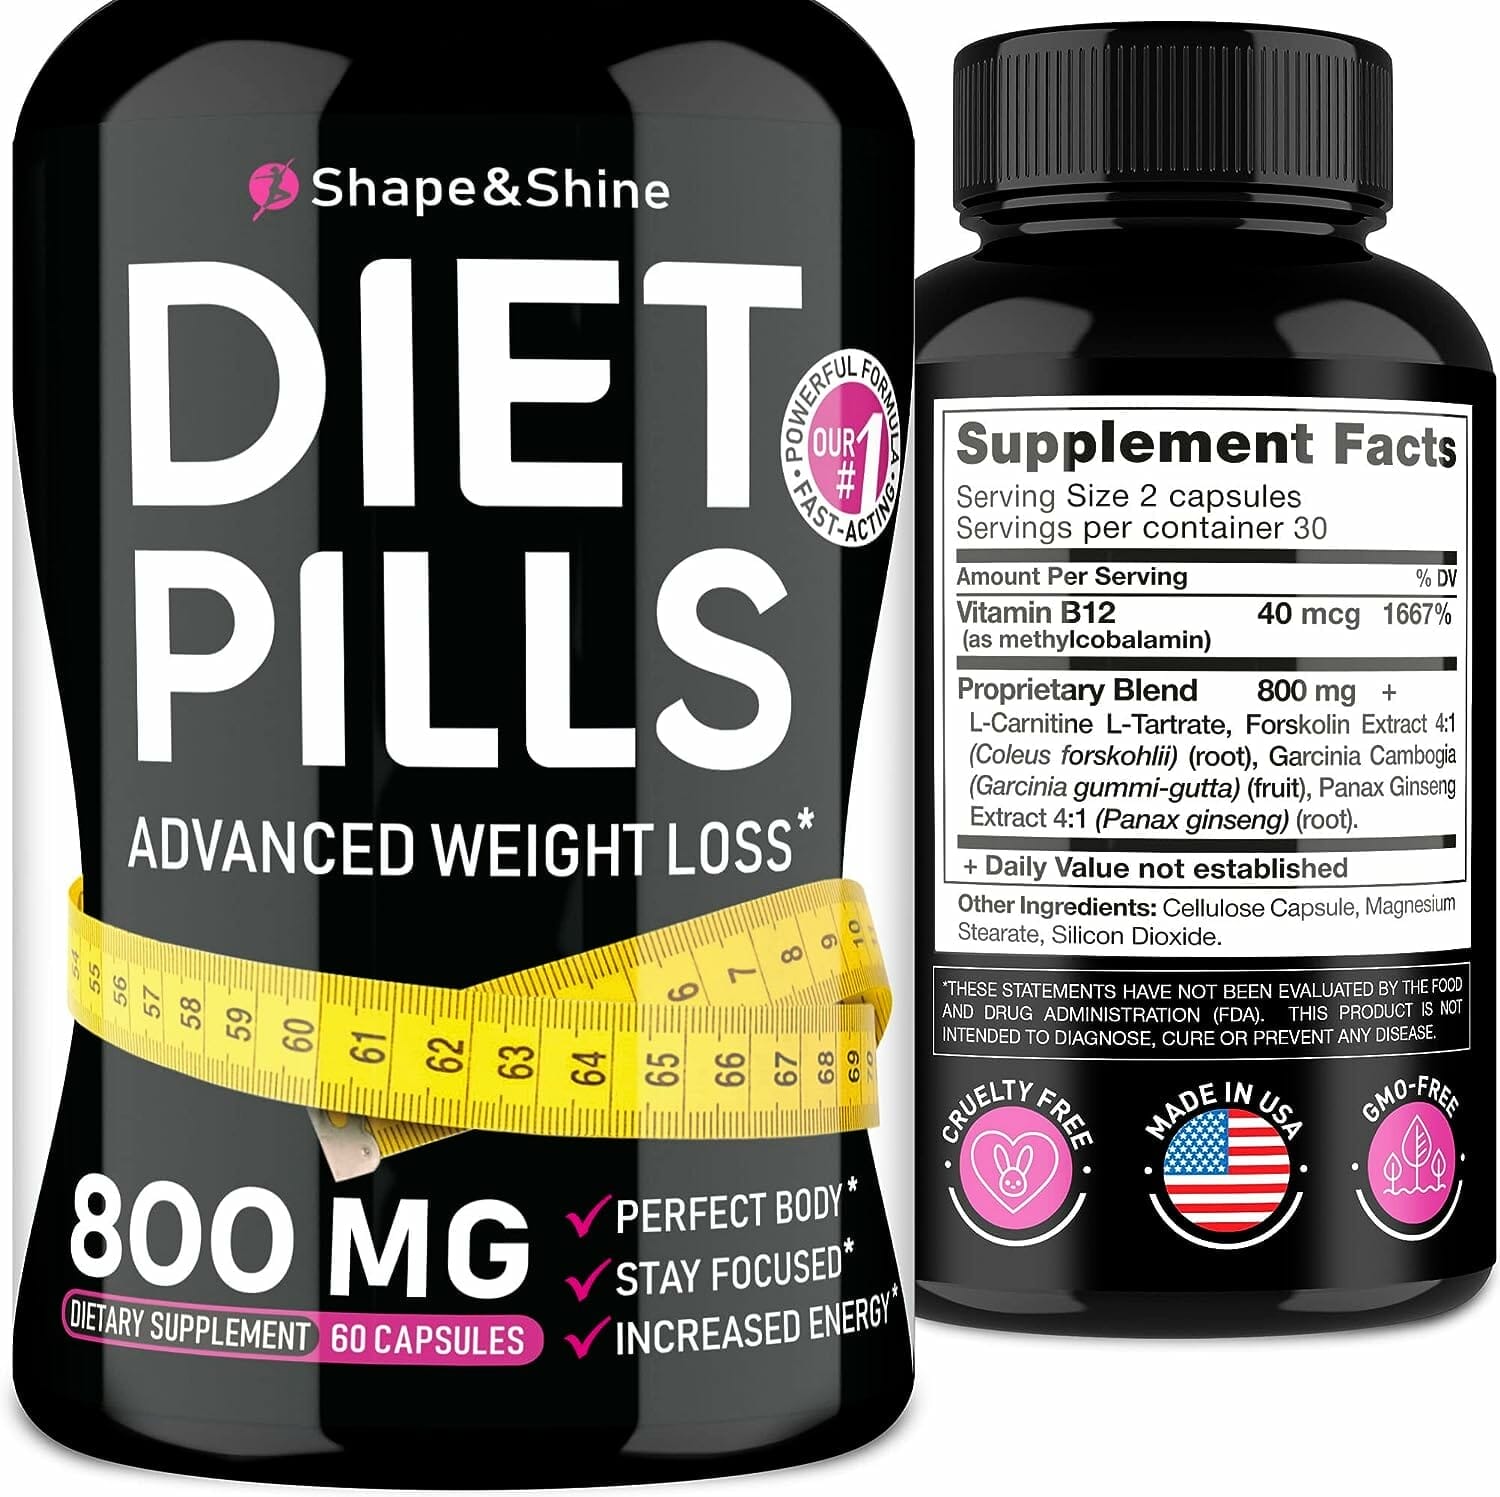 weight control aid diet that work fast for women men made in the usa safe dietary vitamins with garcinia cambogia pills 1